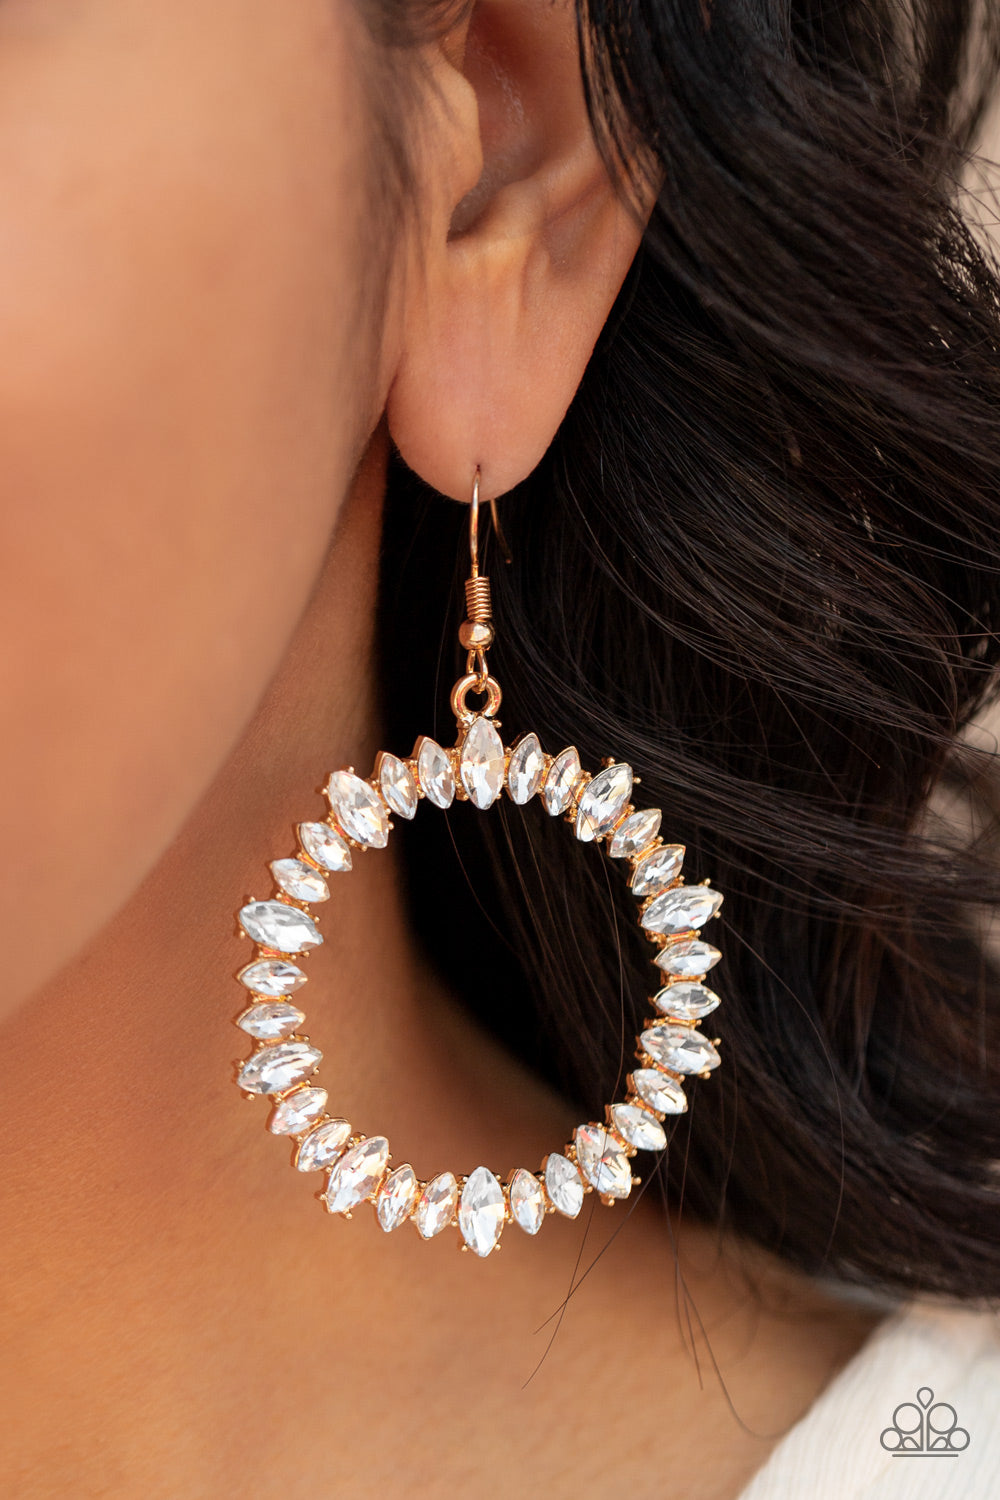 Paparazzi Accessories Glowing Reviews - Gold Fishhook Earrings encased in gold pronged fittings, an incandescent array of white marquise cut rhinestones delicately coalesce into a glowing hoop. Earring attaches to a standard fishhook fitting.